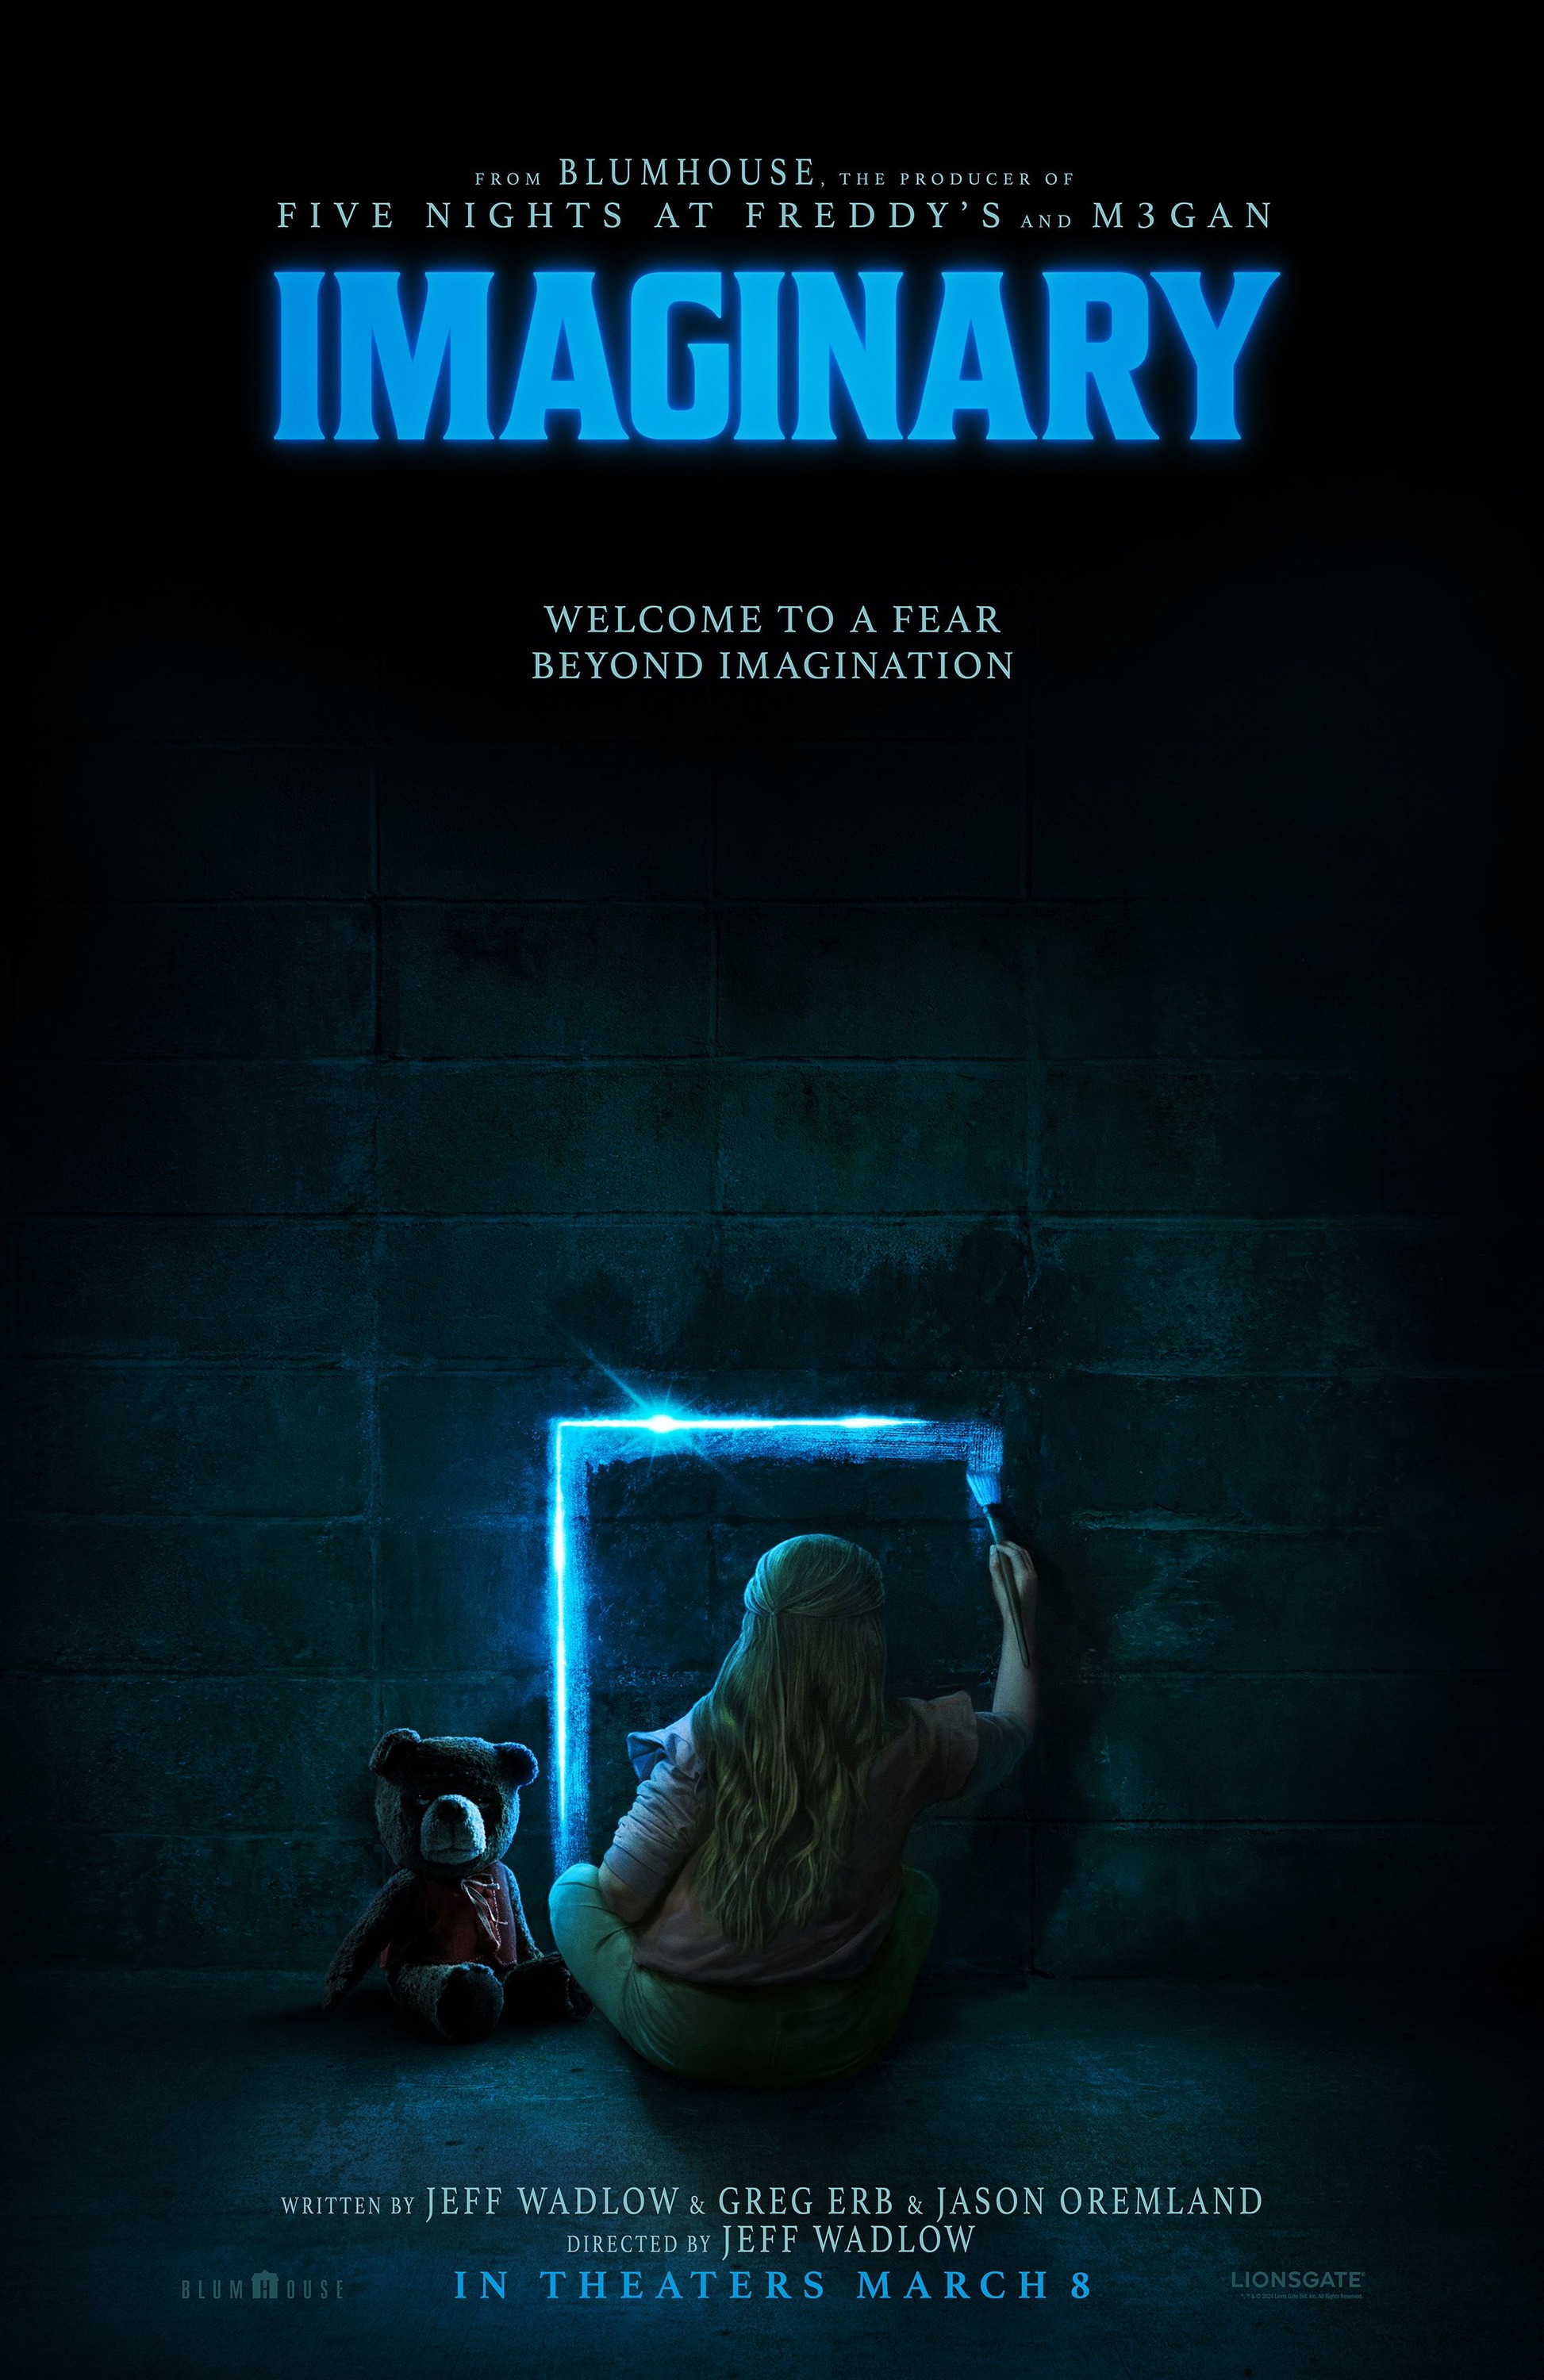 Mega Sized Movie Poster Image for Imaginary (#2 of 2)